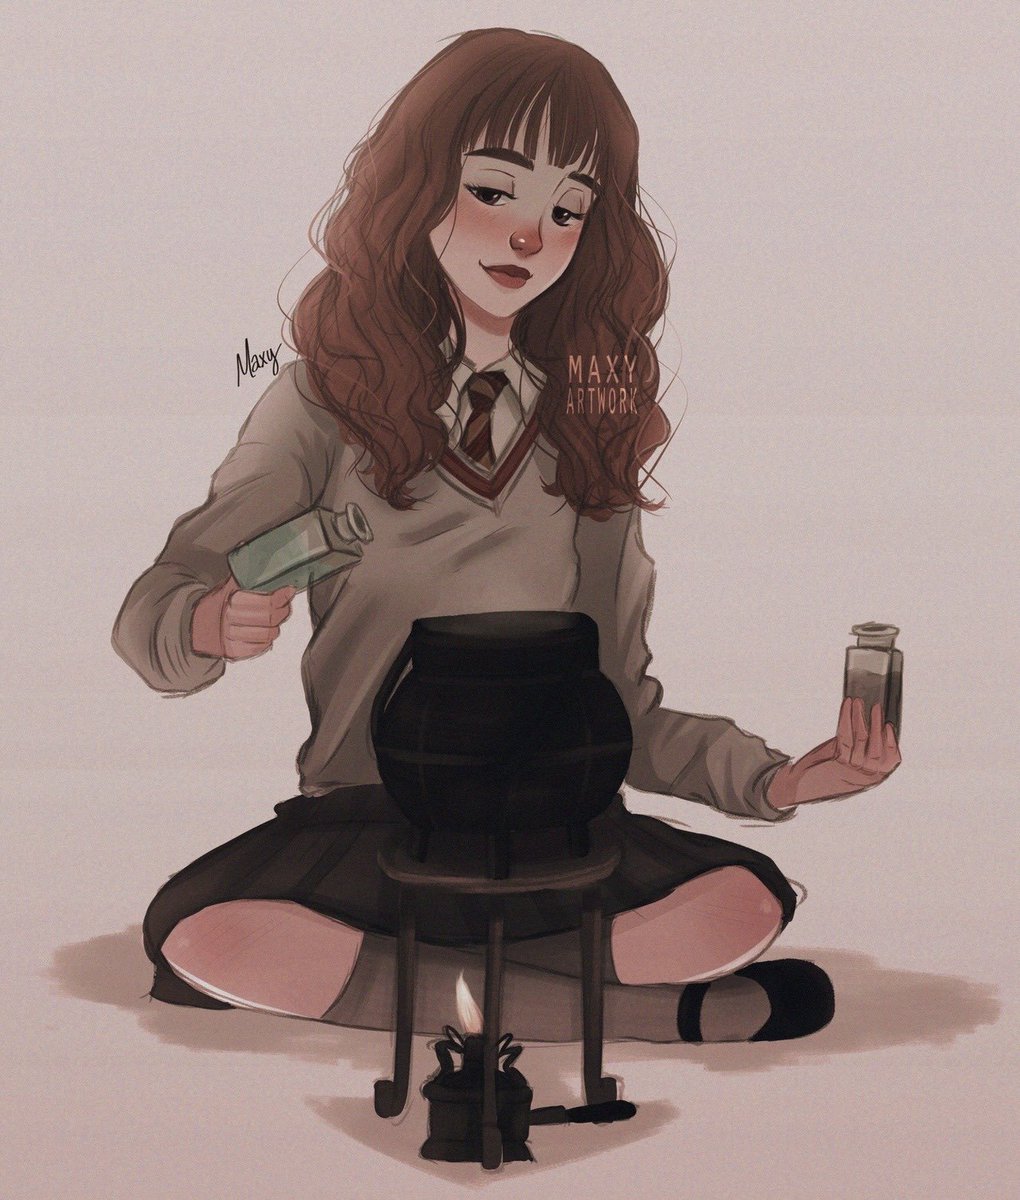 𝑯𝒆𝒓𝒎𝒊𝒐𝒏𝒆 𝑮𝒓𝒂𝒏𝒈𝒆𝒓, Founder of the Society for the Promotion of Elfish Welfare and deputy Leader of Dumbledore's Army in her fifth year. She played a major role into defeating Lord Voldemort during the battle of Hogwarts.(art by maxyartwork on tumblr)